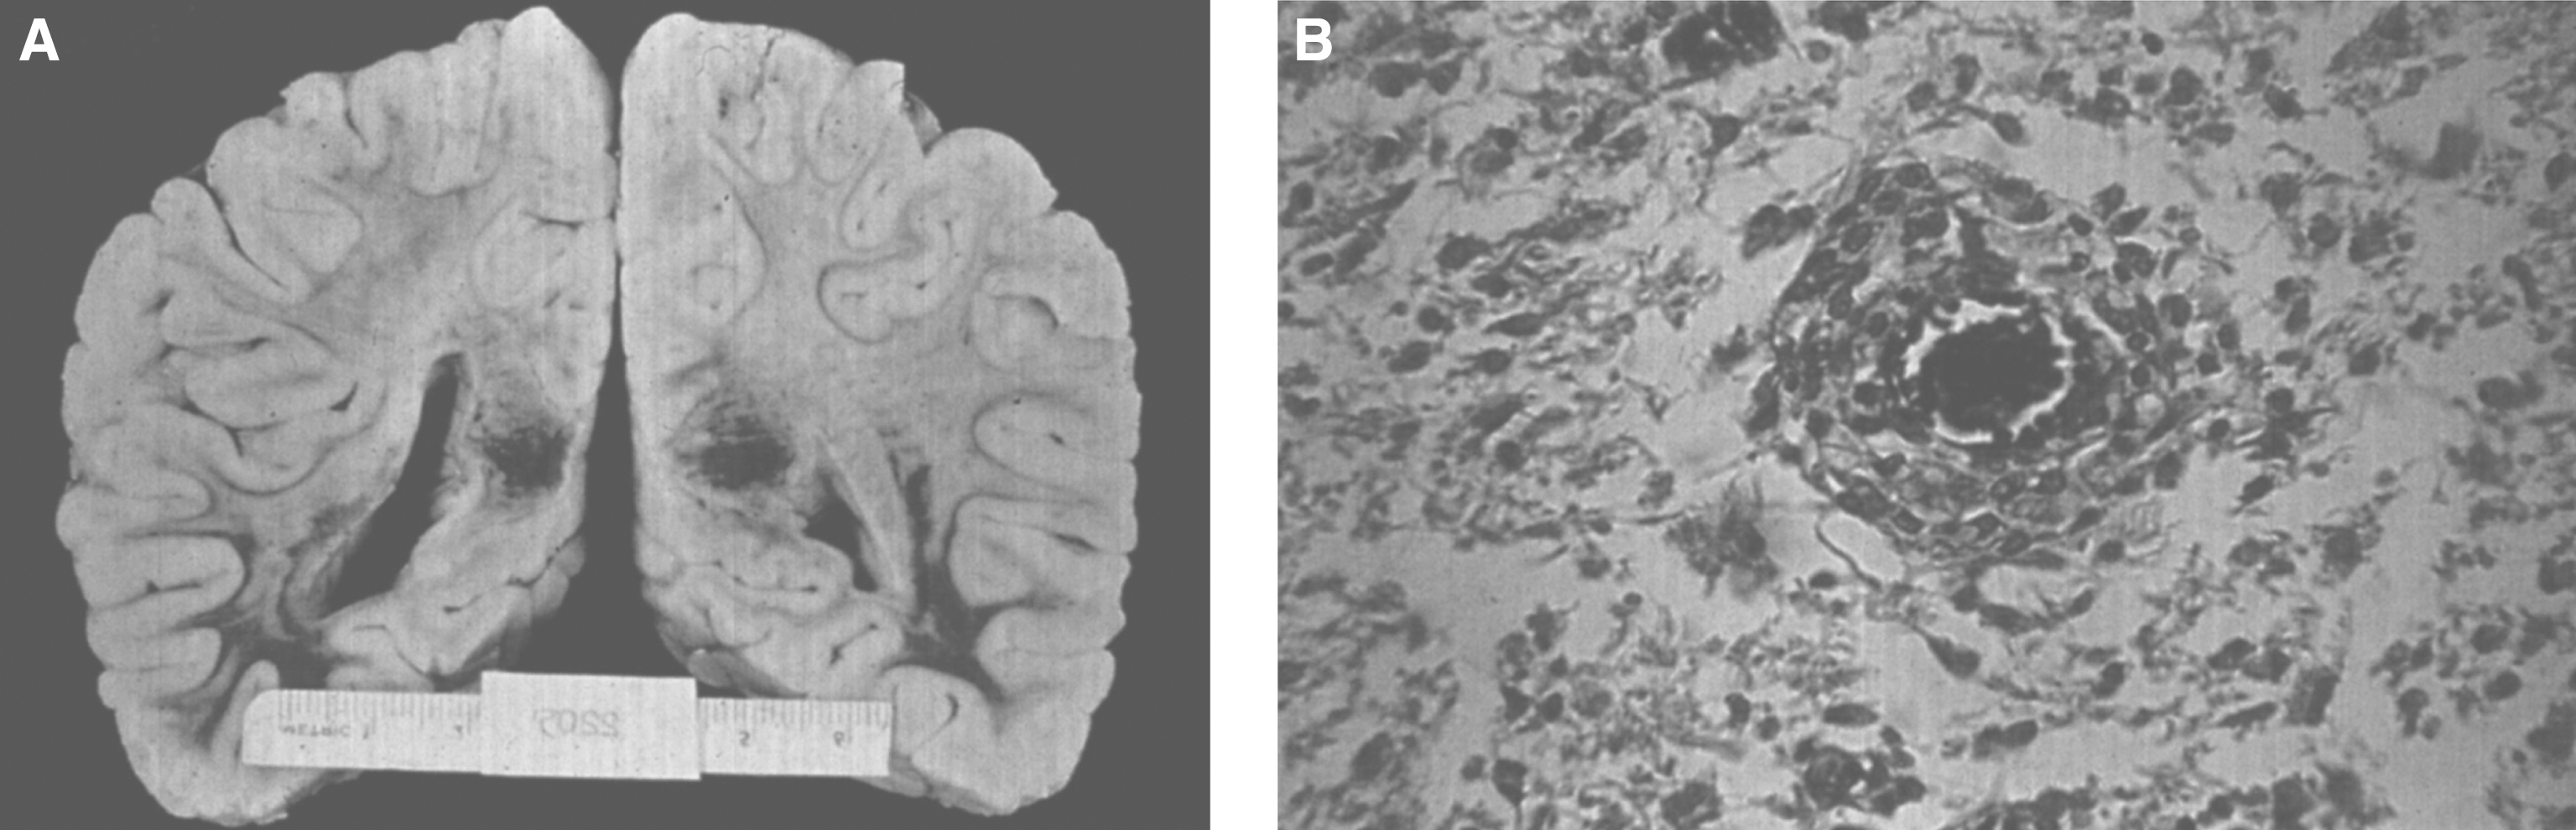 Krabbe disease. (A) Coronal section of the brain stained with oil red O. Only a few myelinated areas stain. The remainder of the white matter does not stain, indicating loss of myelin. (B) Microscopic section of brain with globoid cells in white matter. The brain does not store the substrate, galactosylceramide, but it stimulates infiltration of macrophages which transform to globoid cells. The increased levels of psychosine that occur have cytotoxic effects.